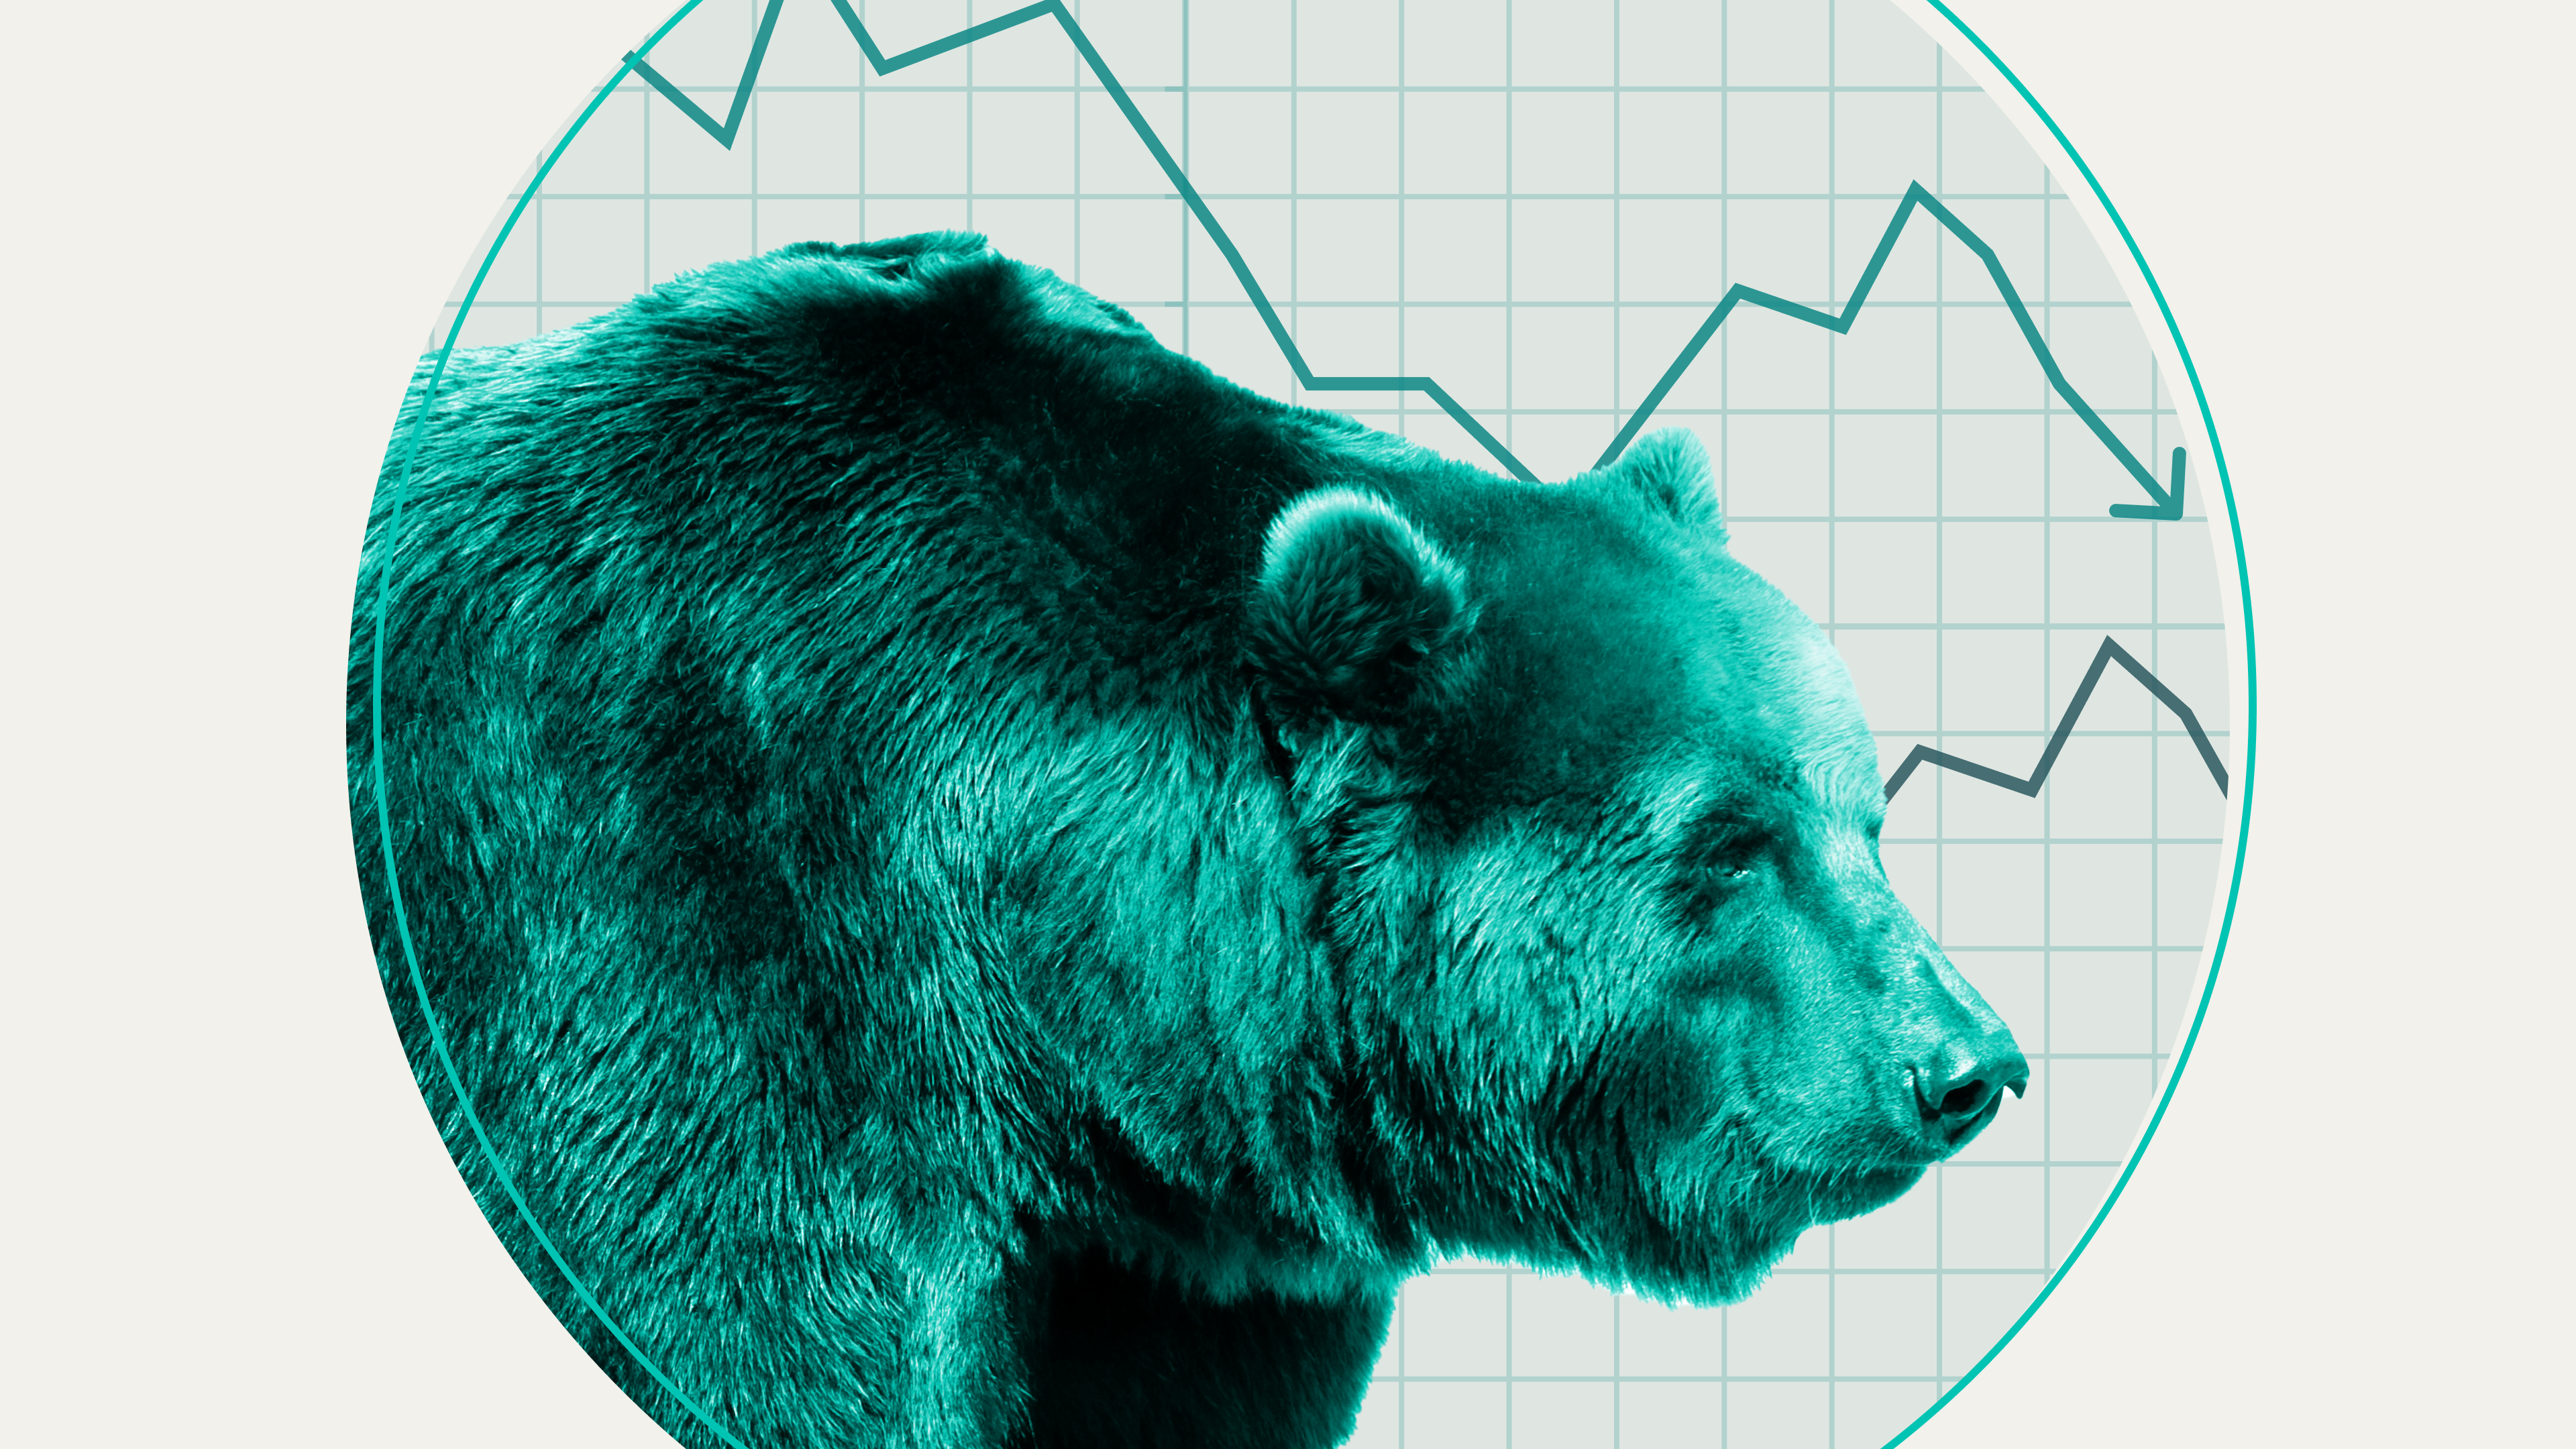 A bear in front of stock market graphs.